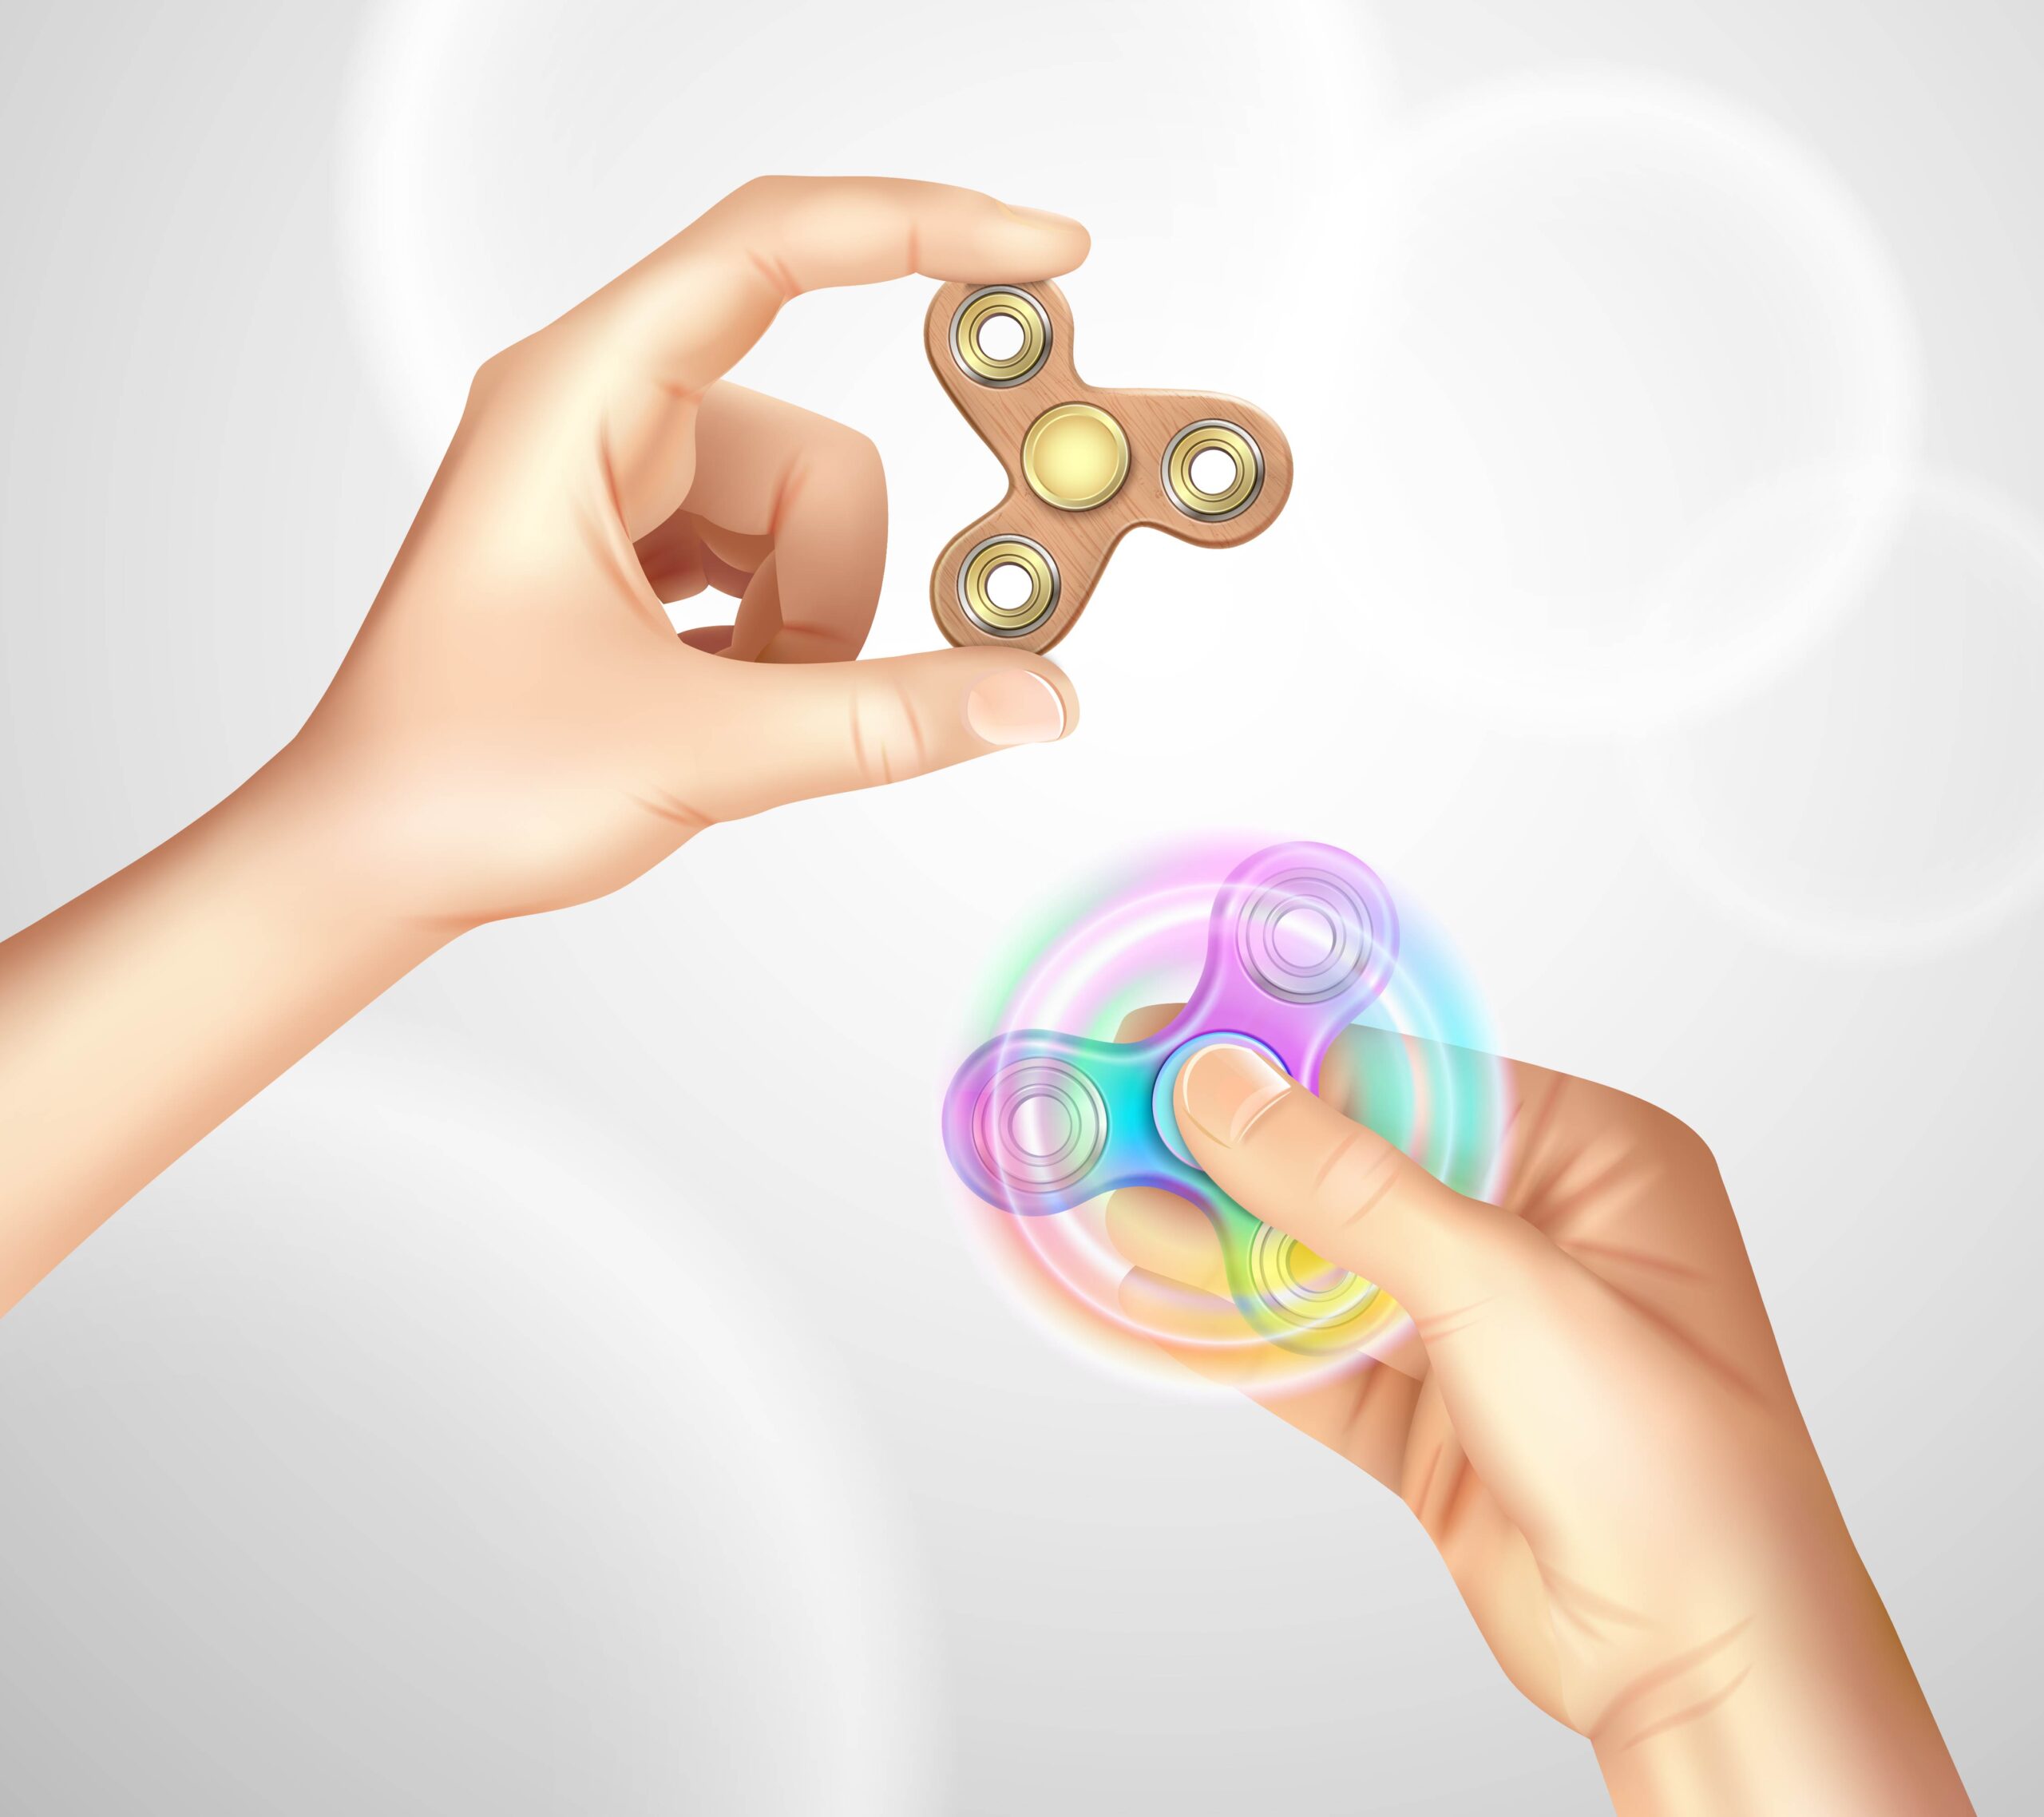 Metal fidget toys for adults